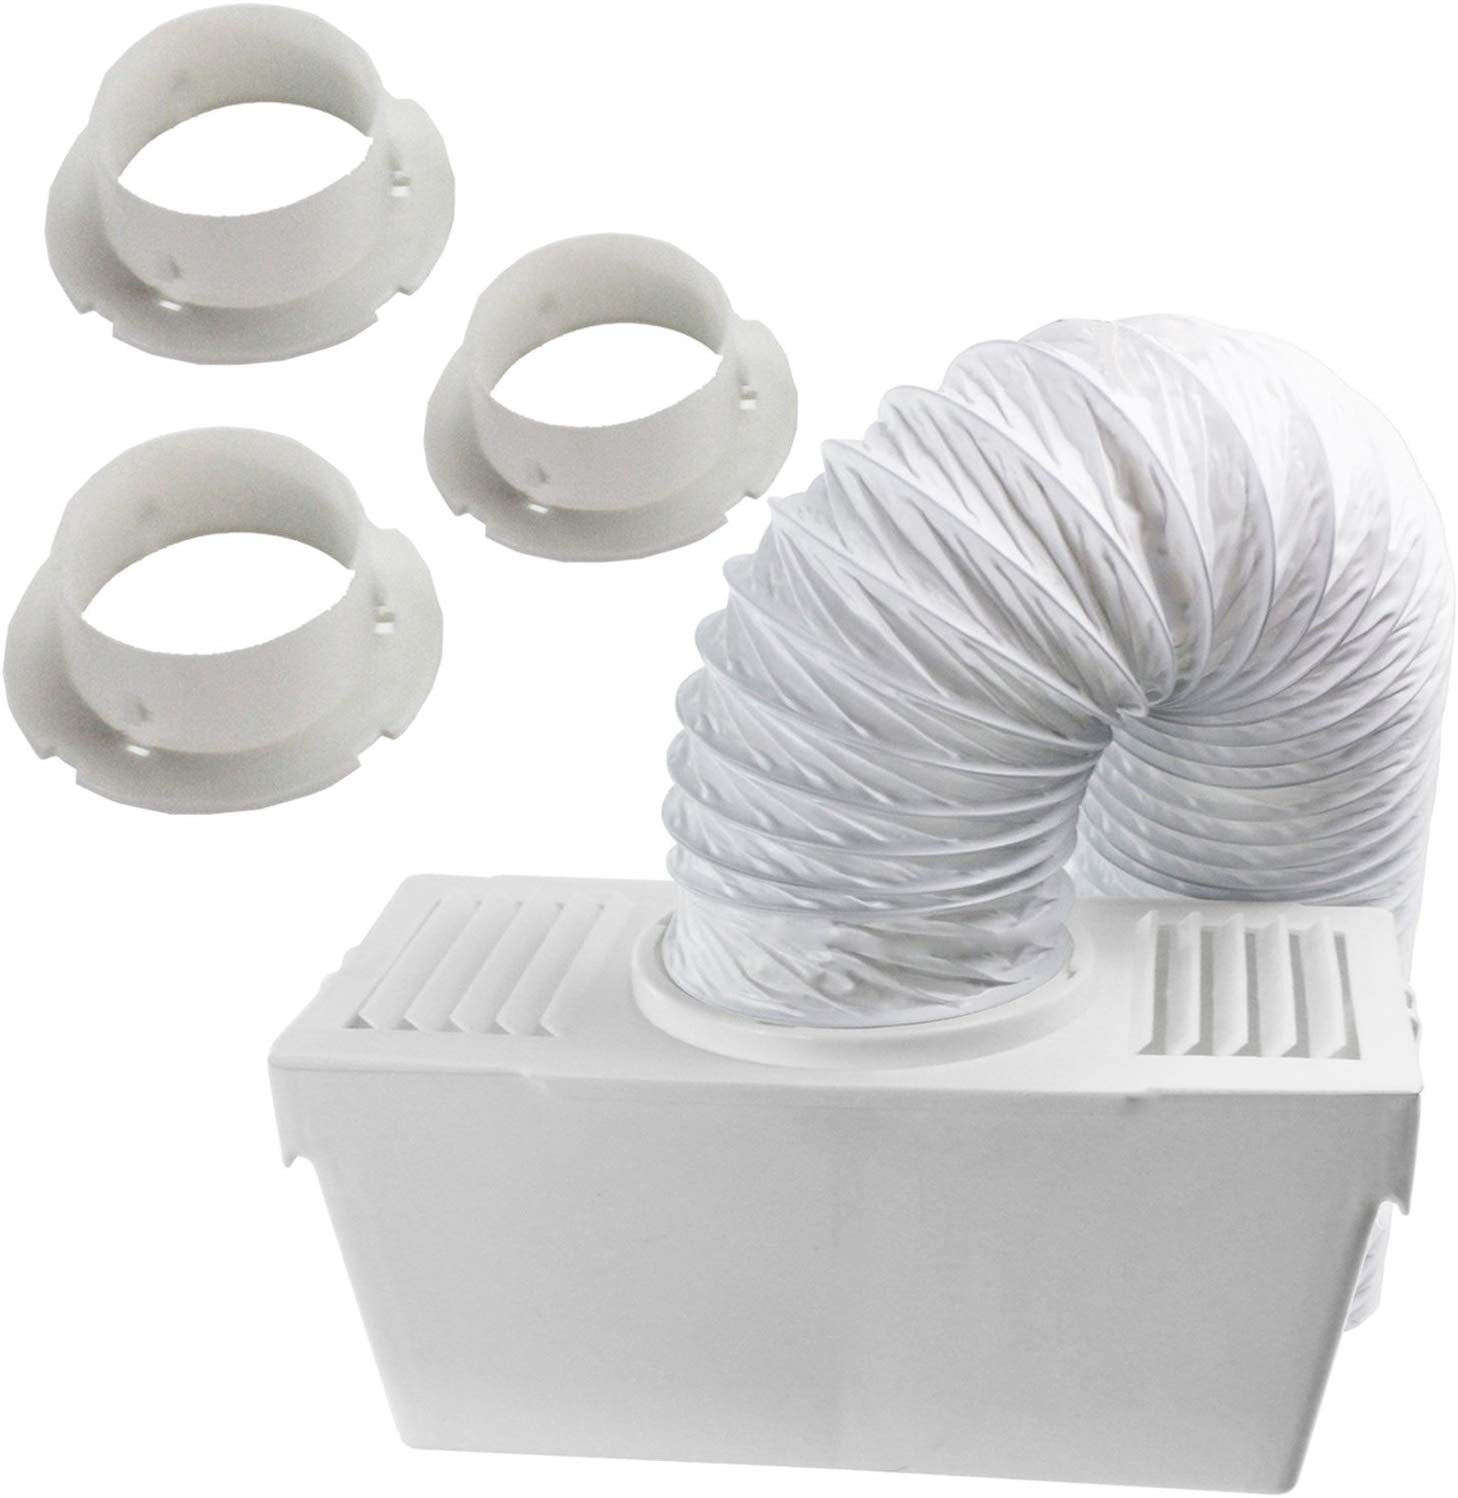 Vent Hose Condenser Kit with 3 x Adapters for Electra Tumble Dryer (1.2m)